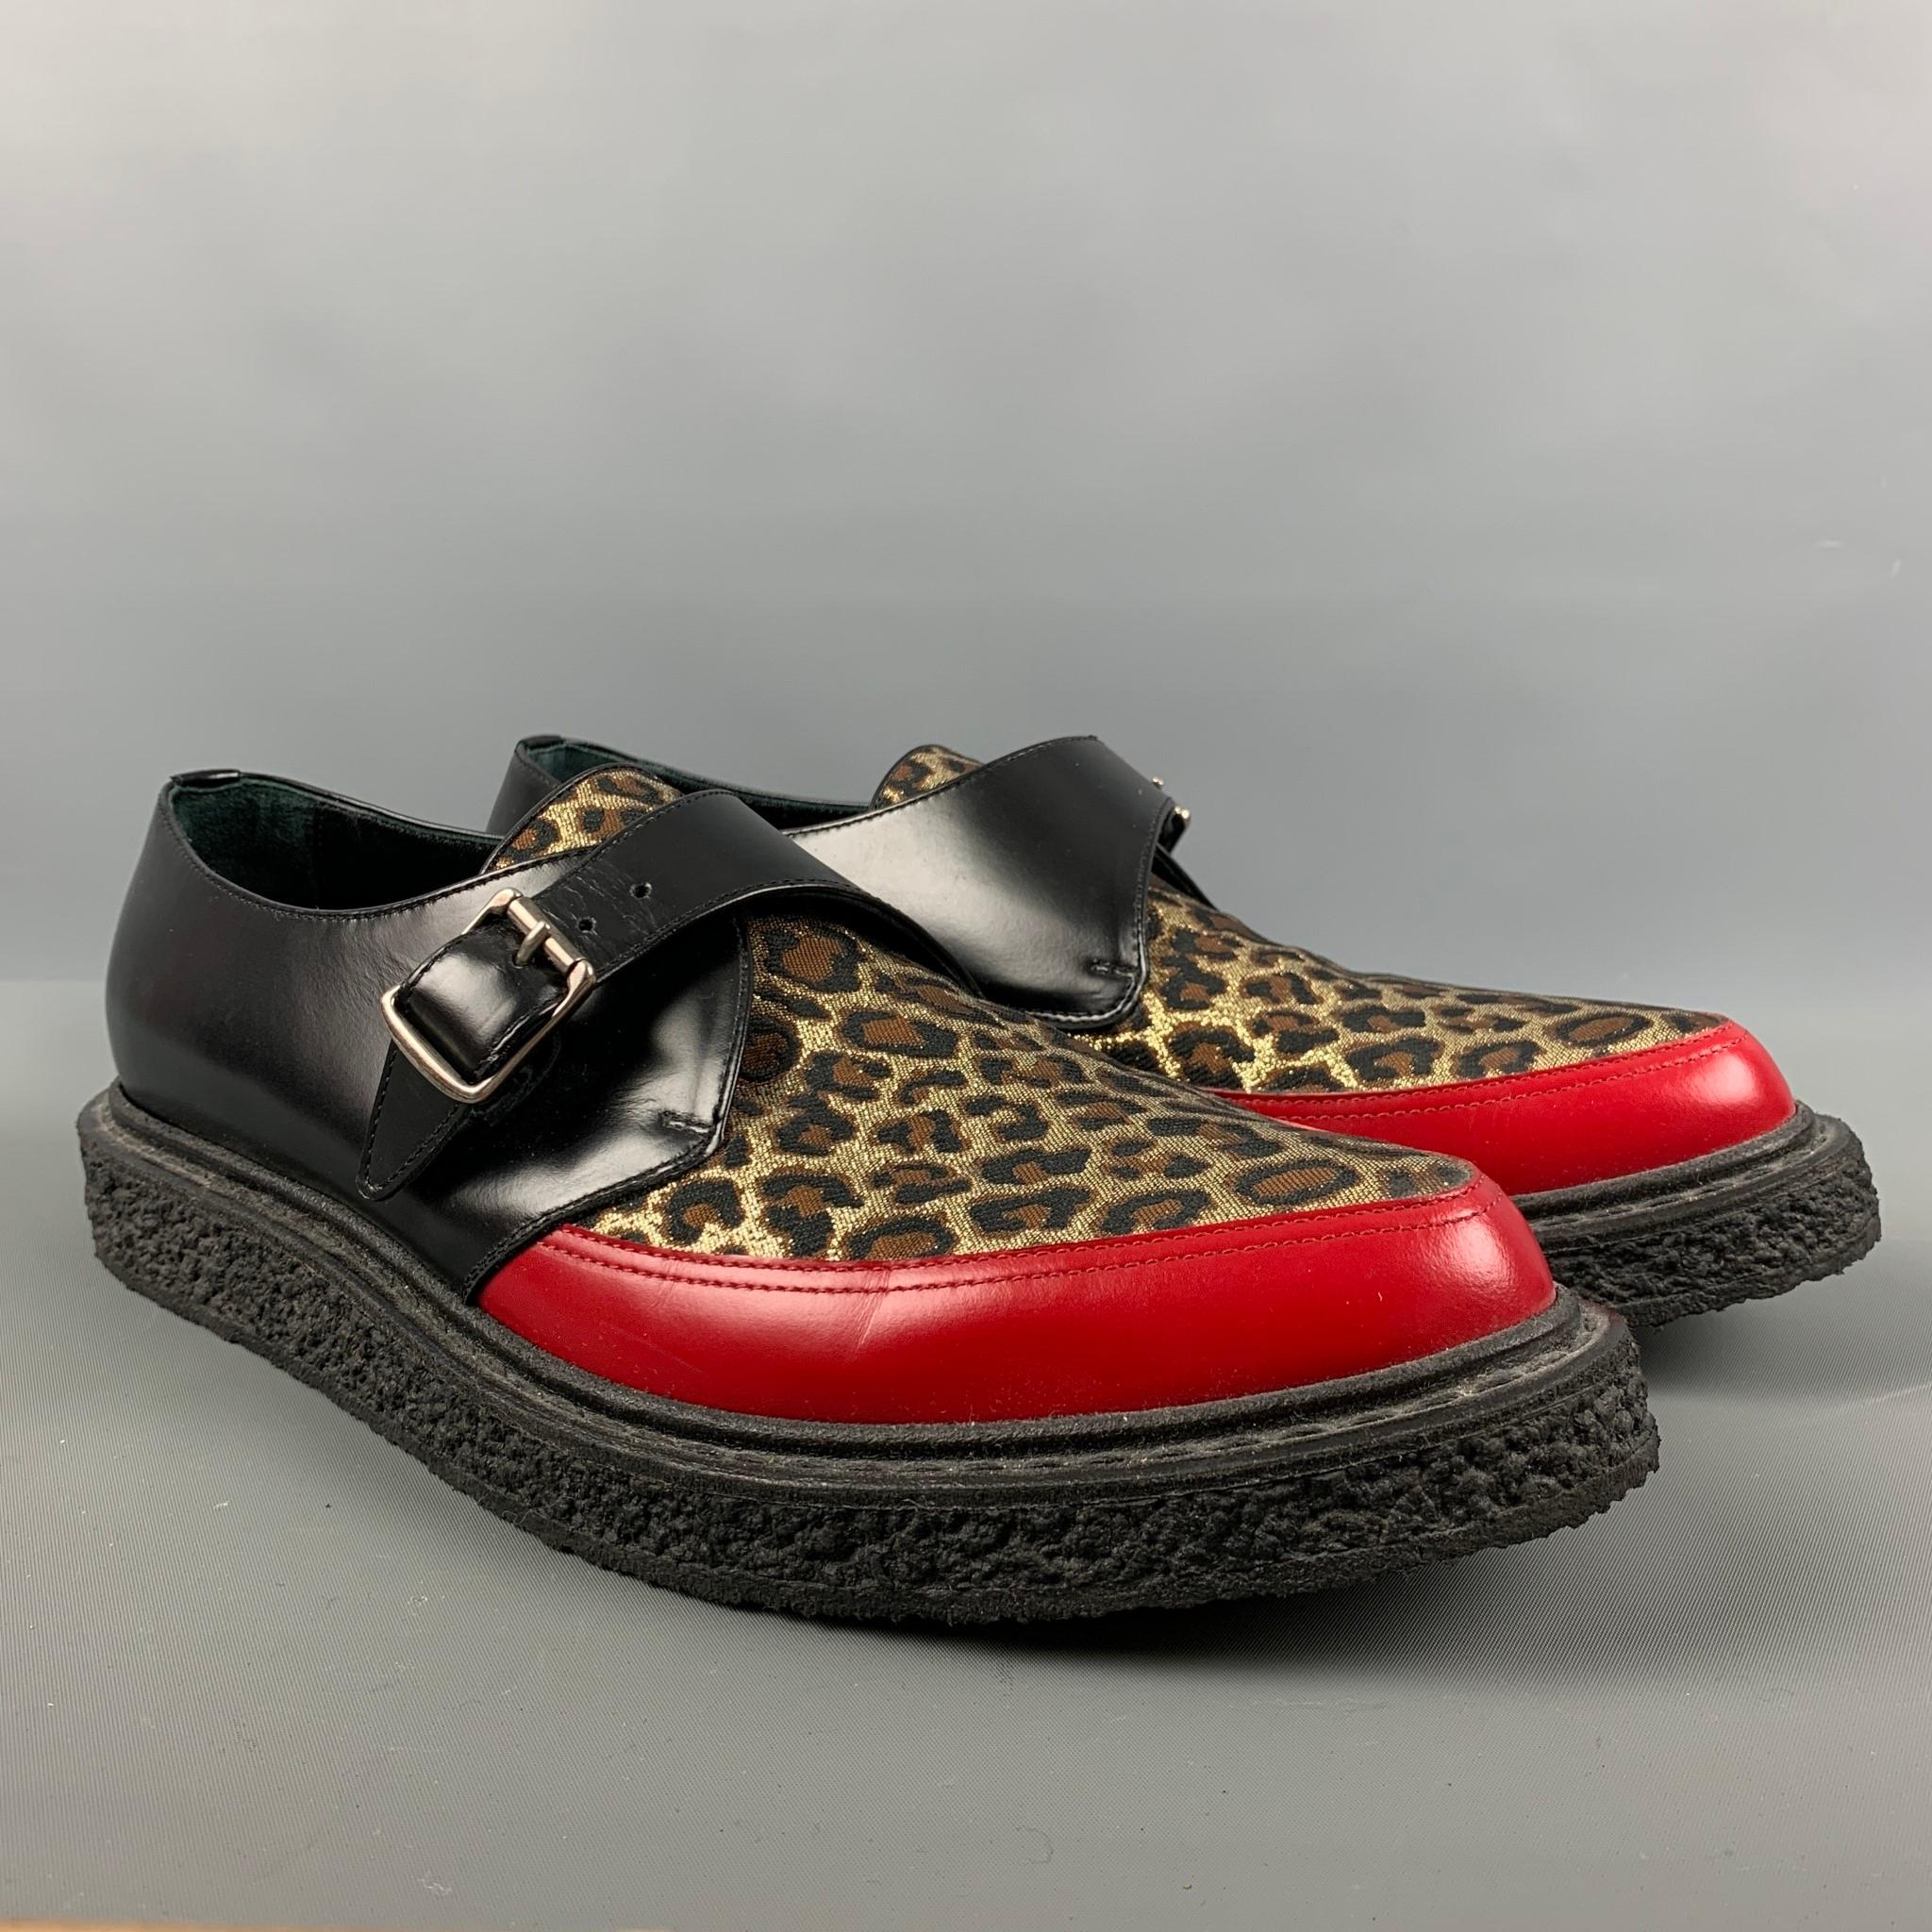 SAINT LAURENT Fall-Winter 2014 loafers comes in a black and red leather featuring a mixed material style, animal print detail, and a single monk strap. Made in Italy.

Excellent Pre-Owned Condition.
Marked: RO 362269 45

Outsole: 13 in. x 5 in 